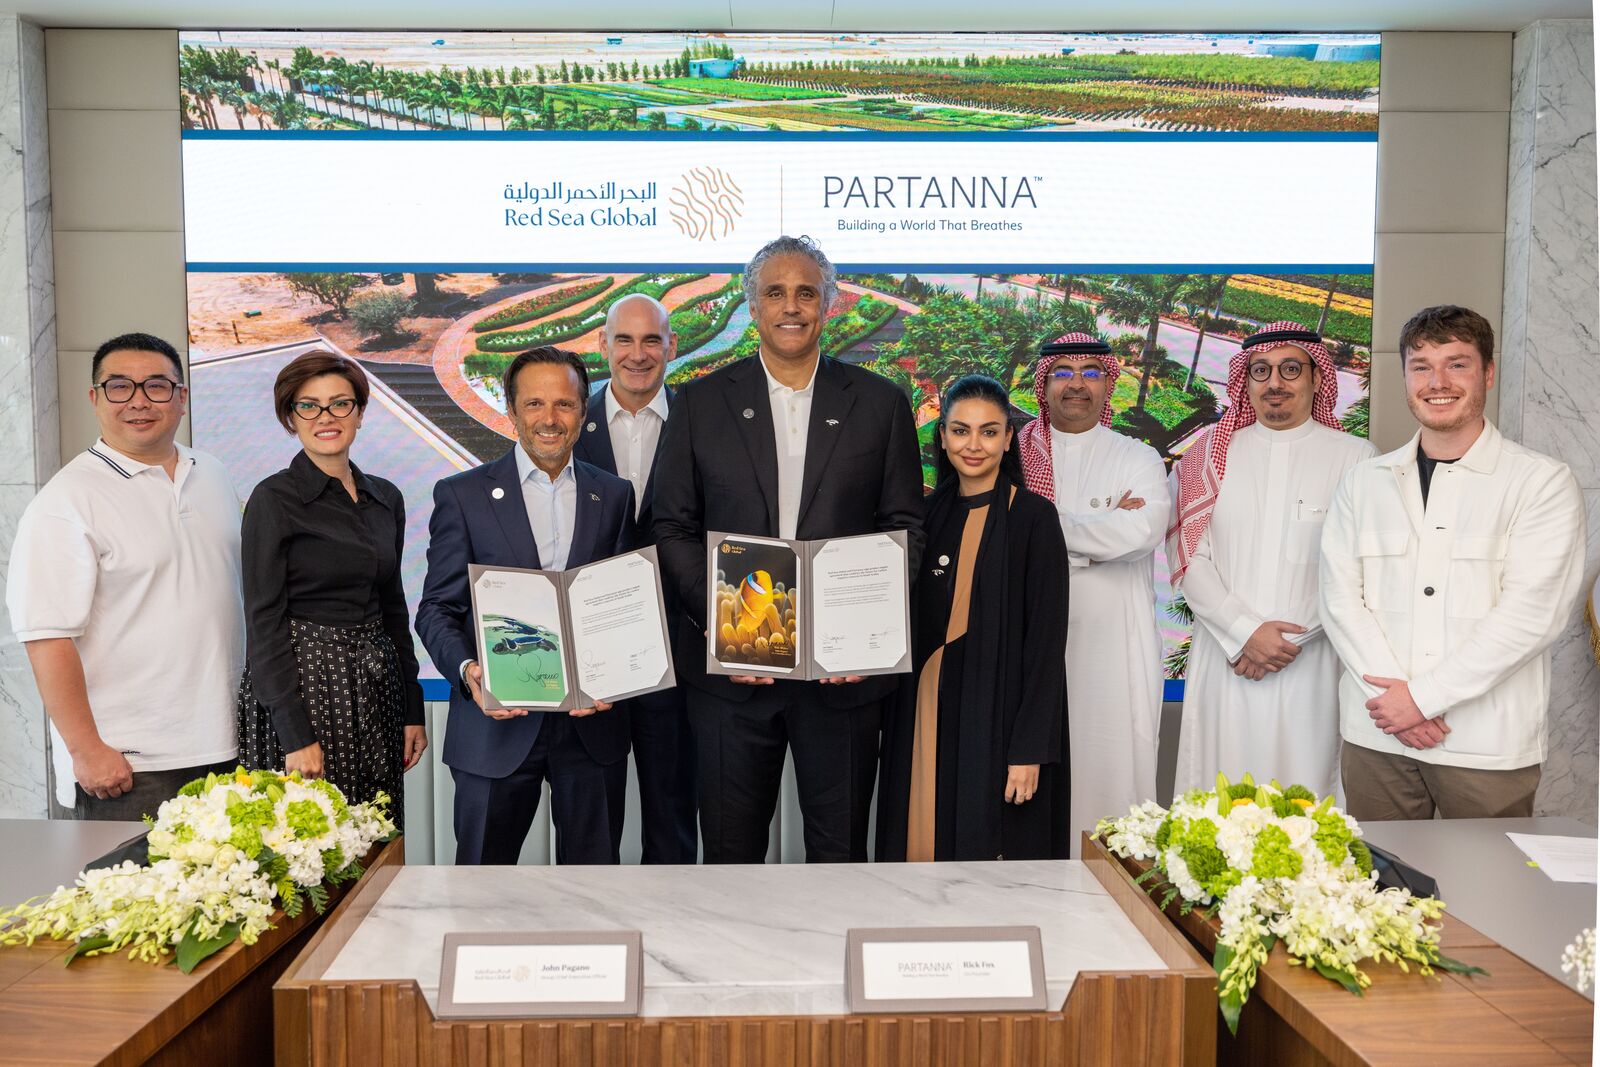 Red Sea Global and Partanna sign product supply agreement that could lay the future for carbon negative concrete in Saudi Arabia